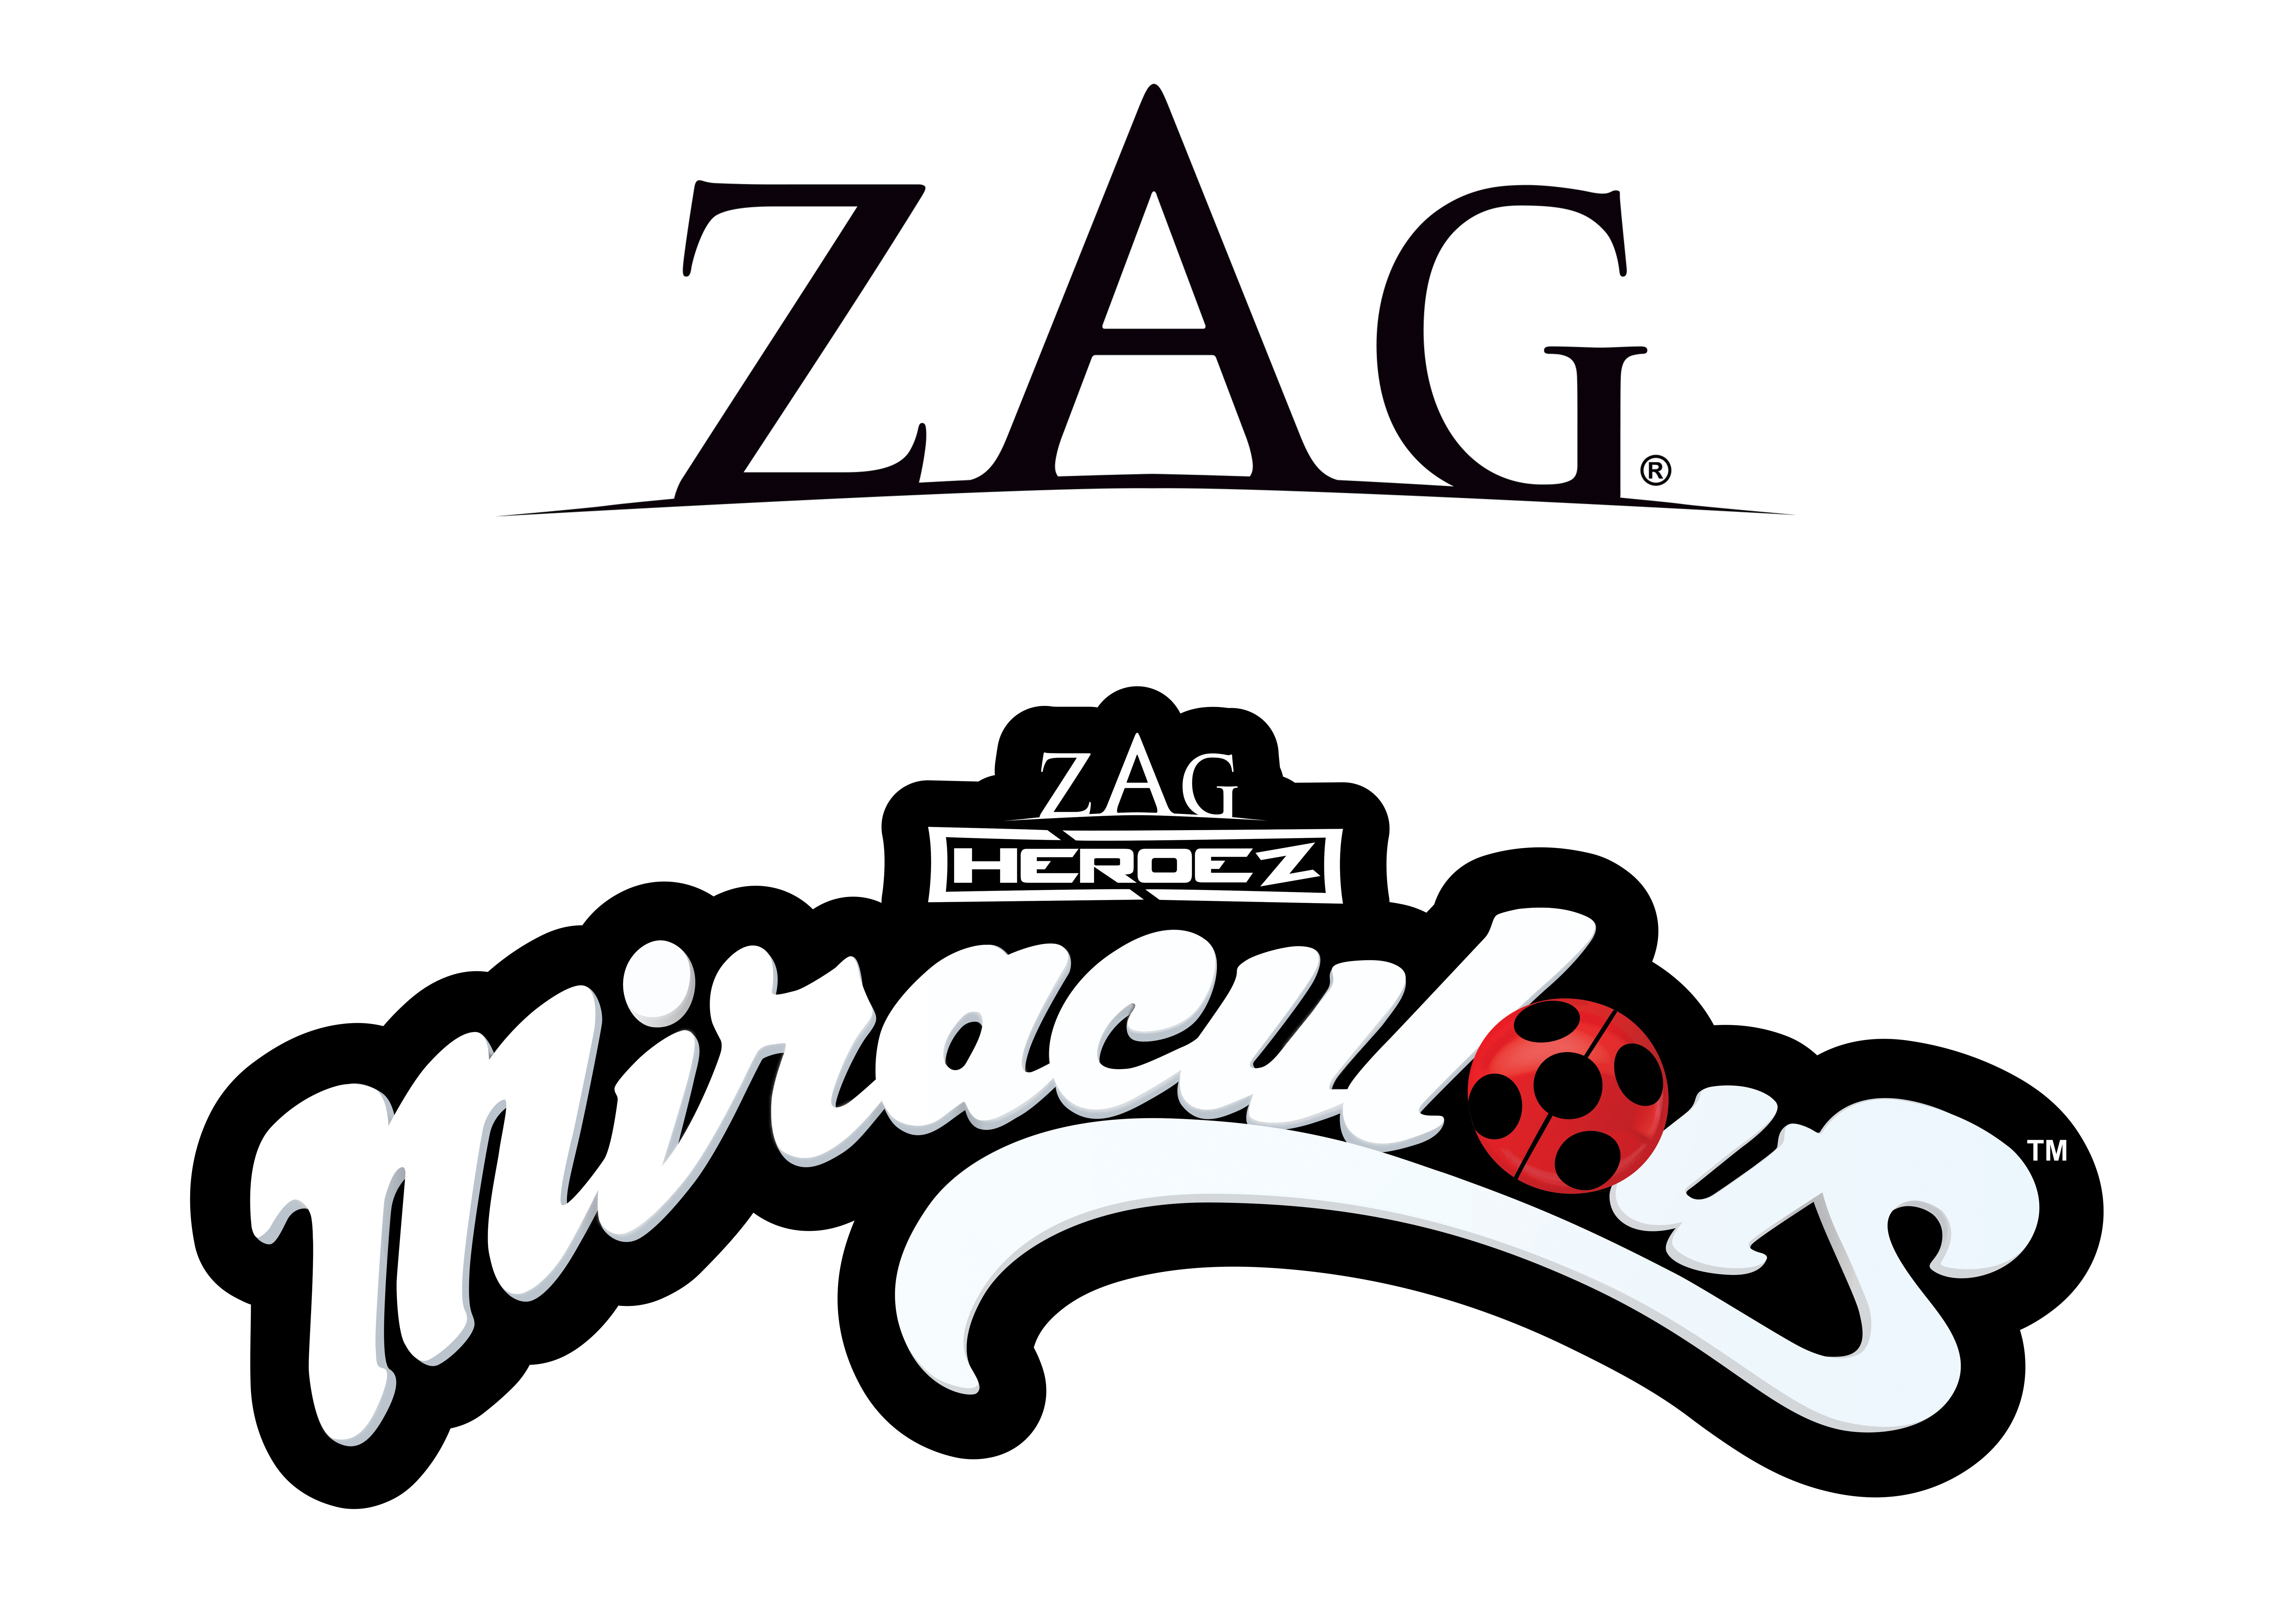 Miraculous Tales Of Ladybug And Cat Noir From The Zag Company To Air On Disney Channel Business Wire